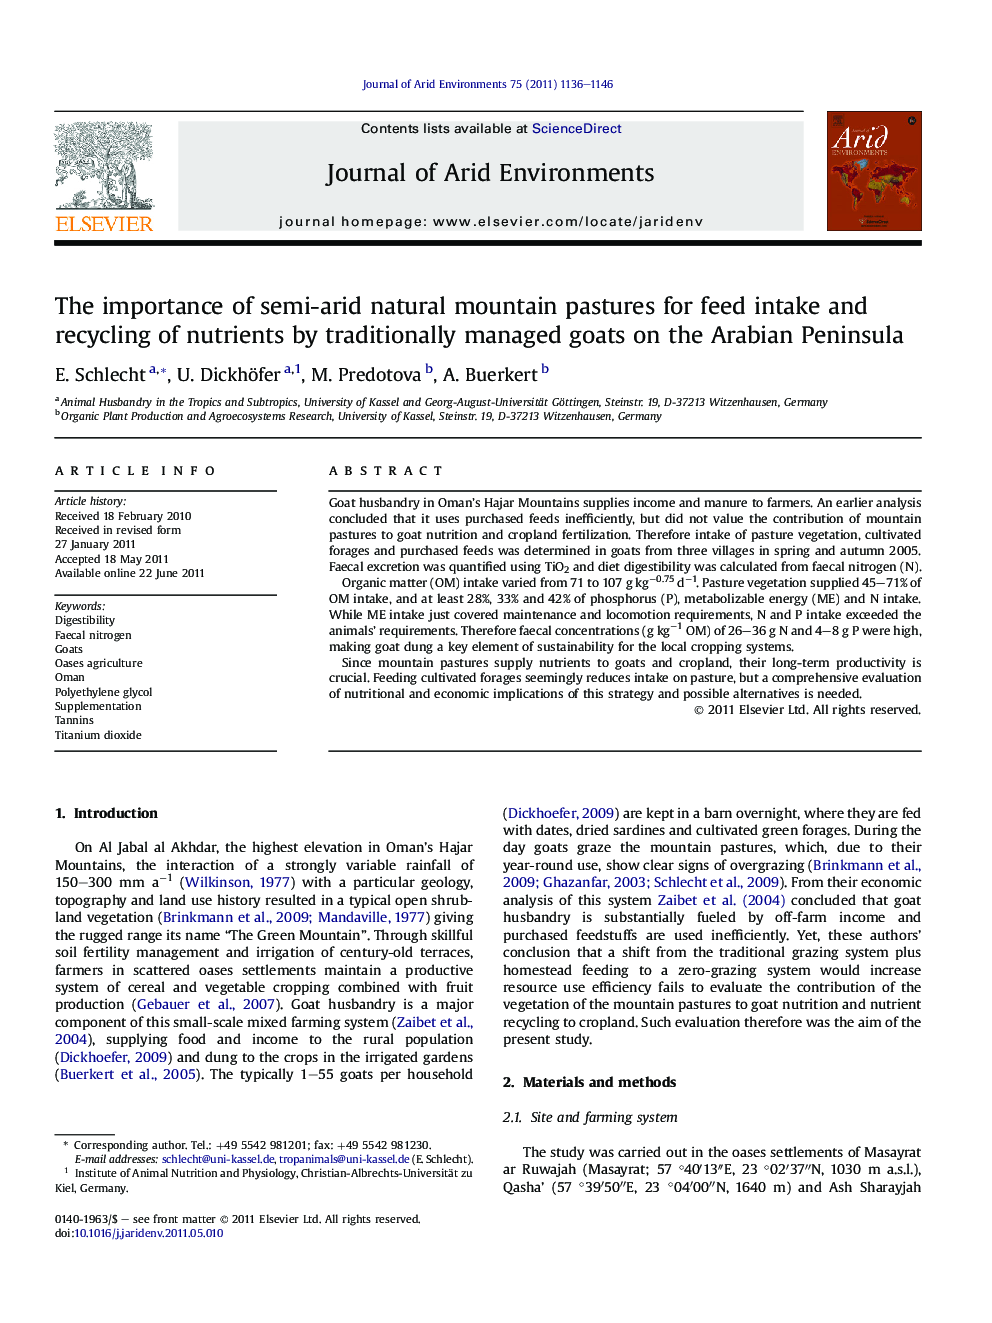 The importance of semi-arid natural mountain pastures for feed intake and recycling of nutrients by traditionally managed goats on the Arabian Peninsula